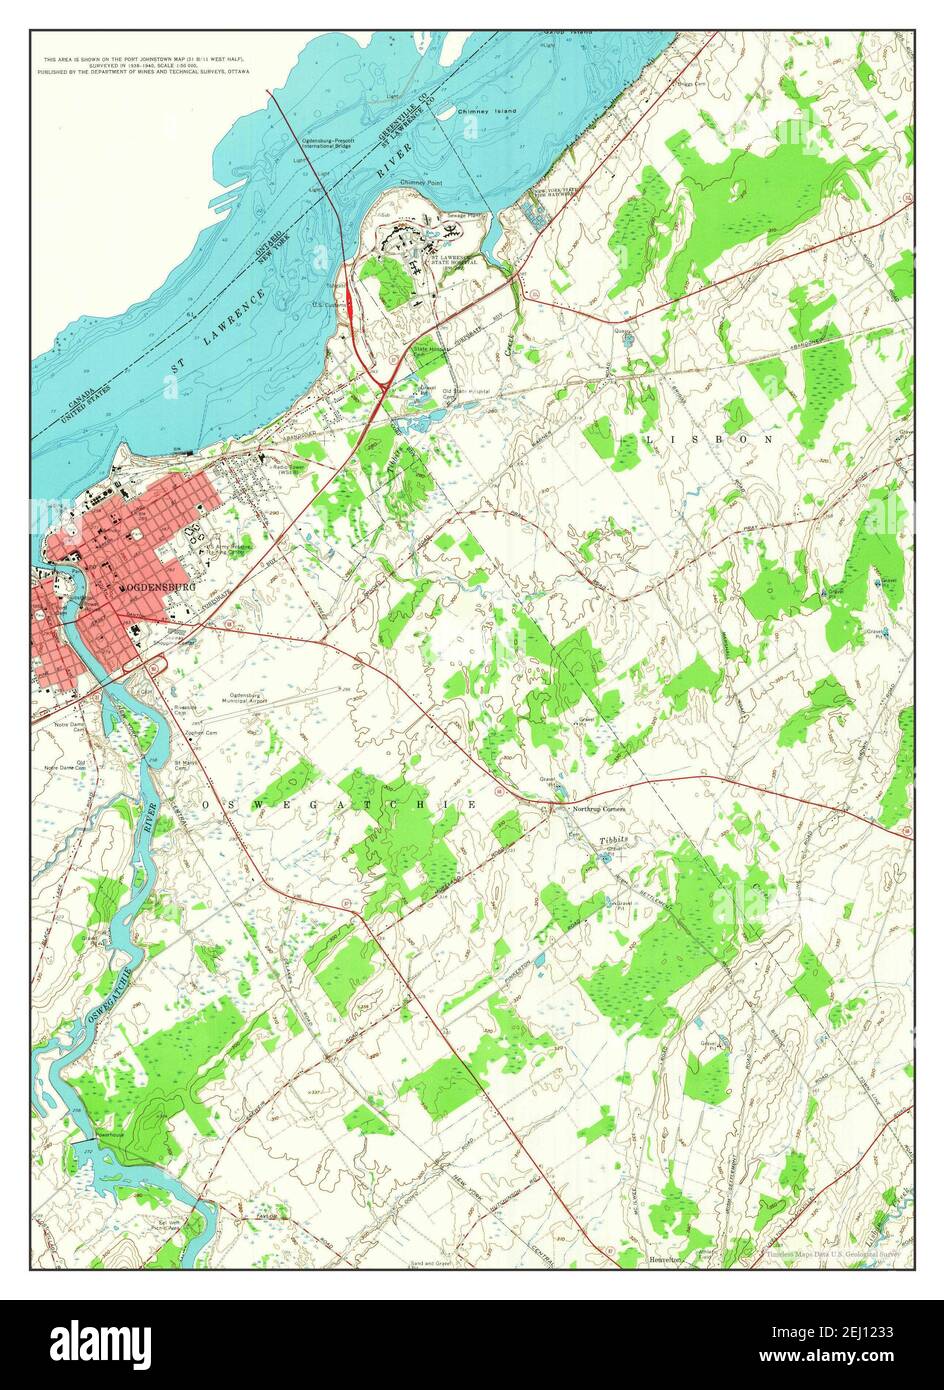 Ogdensburg East, New York, map 1963, 1:24000, United States of America by Timeless Maps, data U.S. Geological Survey Foto Stock